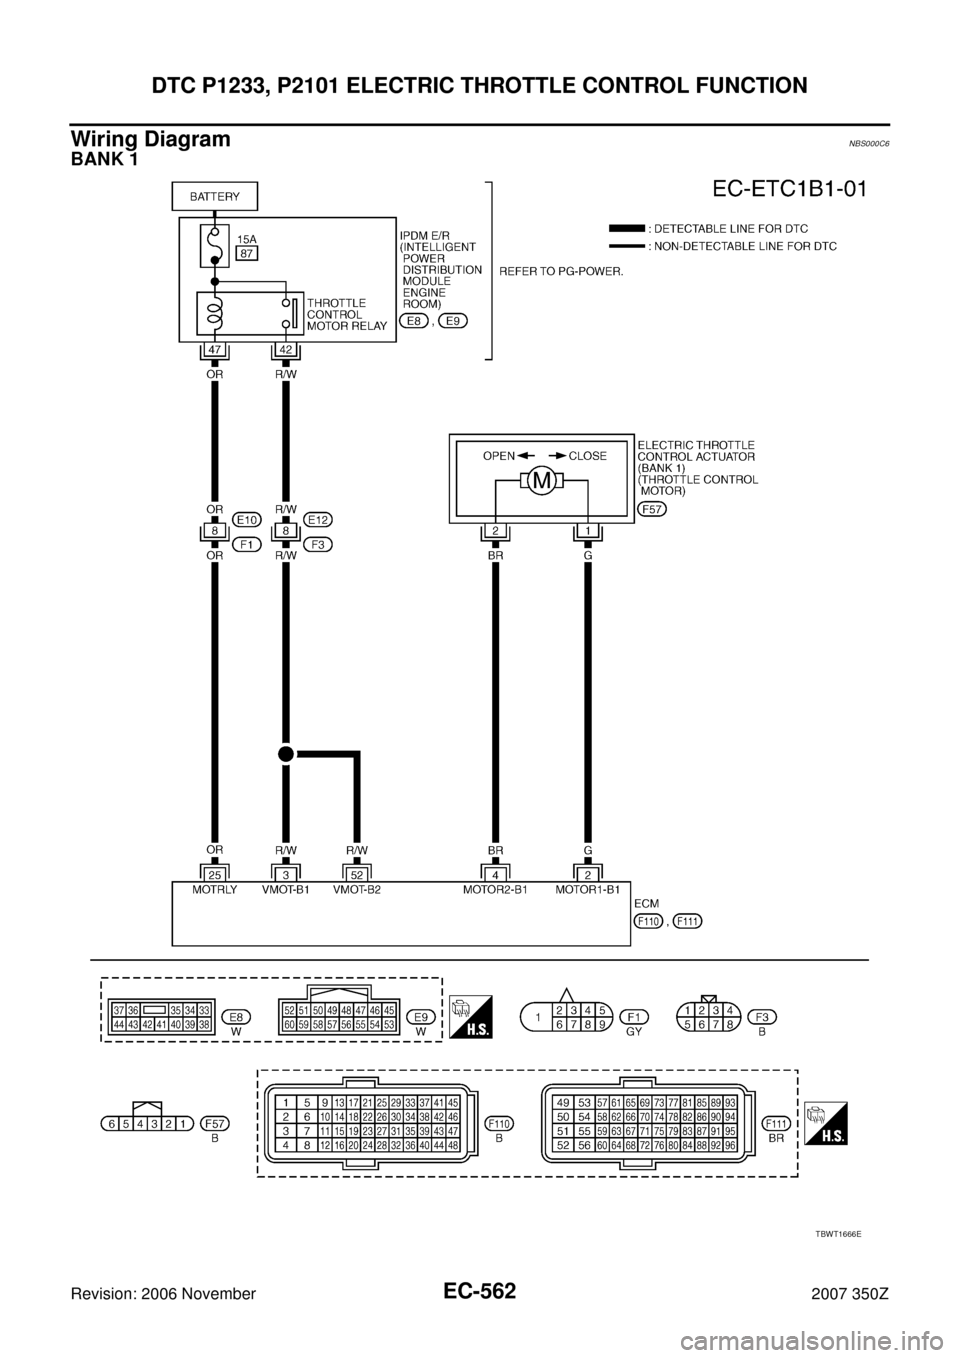 NISSAN 350Z 2007 Z33 Engine Control Workshop Manual EC-562
DTC P1233, P2101 ELECTRIC THROTTLE CONTROL FUNCTION
Revision: 2006 November2007 350Z
Wiring DiagramNBS000C6
BANK 1
TBWT1666E 